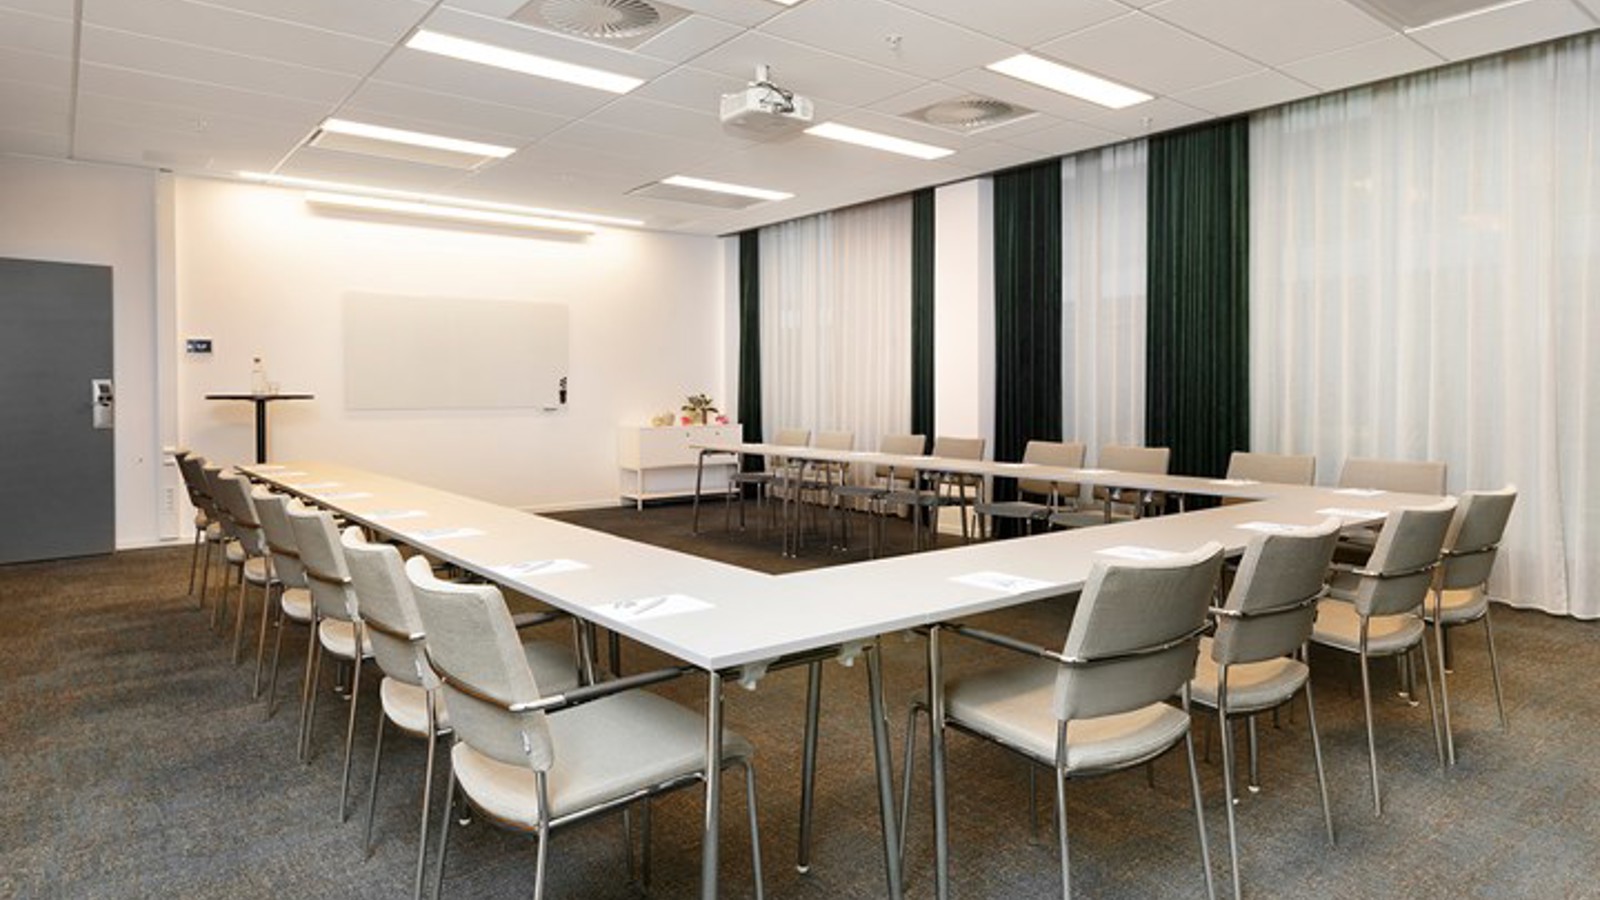 Conference room with u-shaped seating, white chairs, white table, gray carpet and draperies